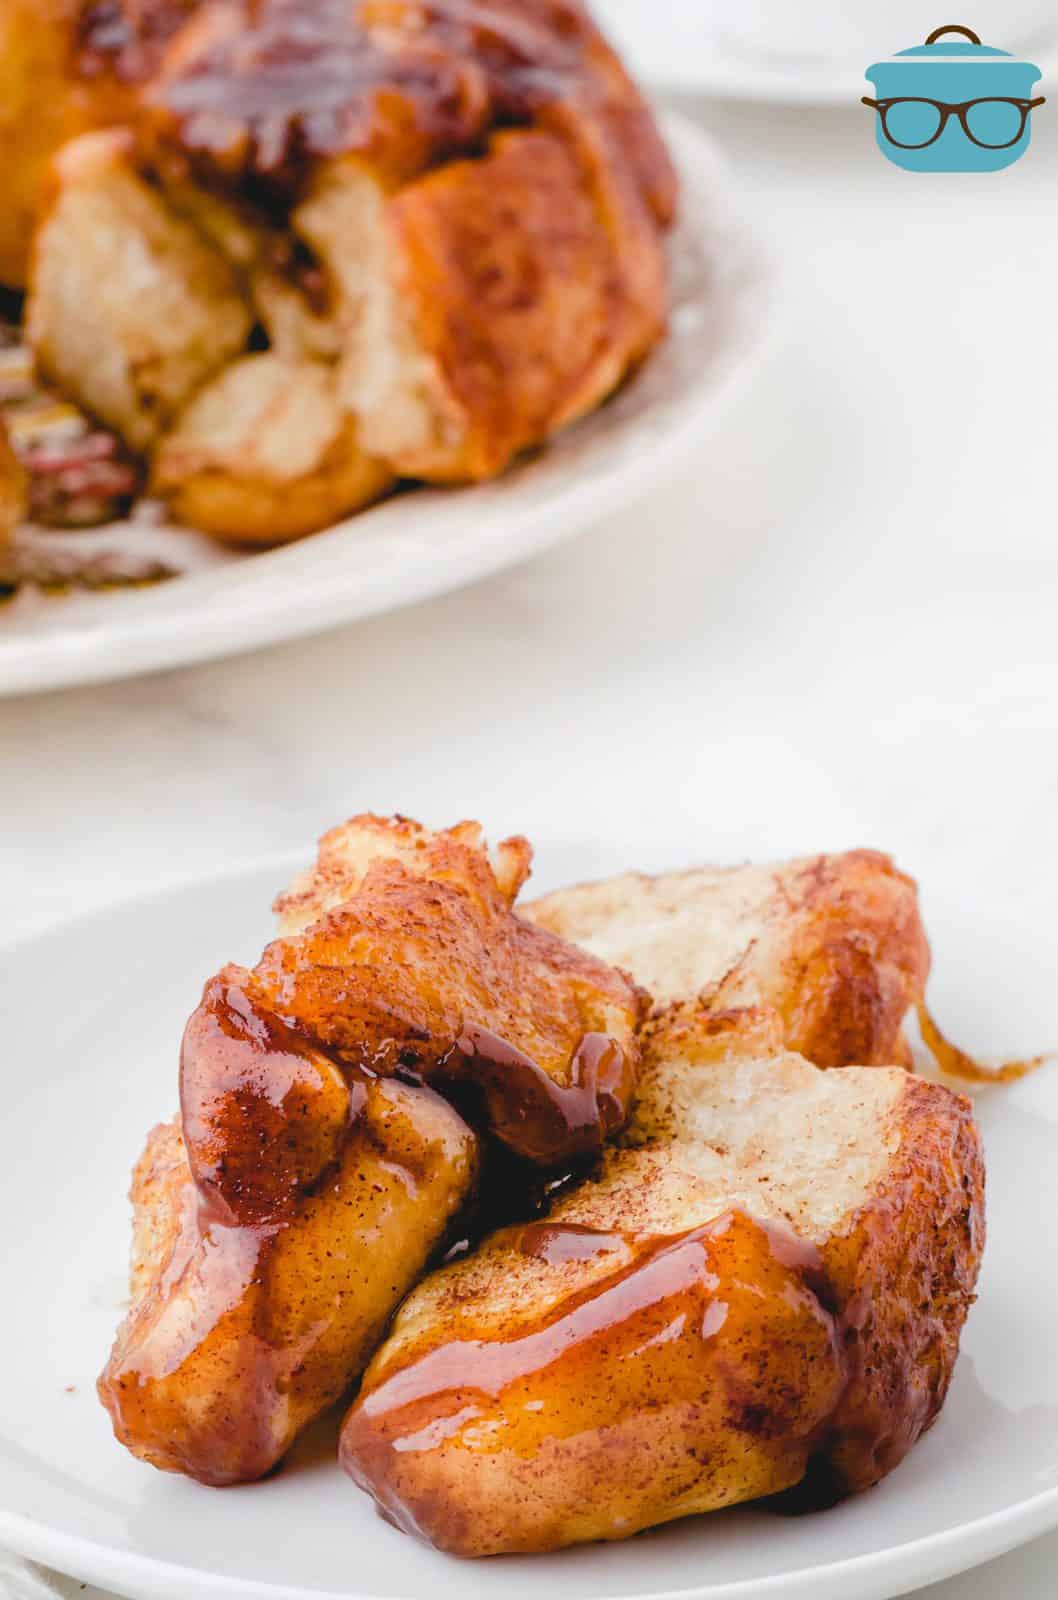 Pieces of Easy Monkey Bread pulled off onto plate.